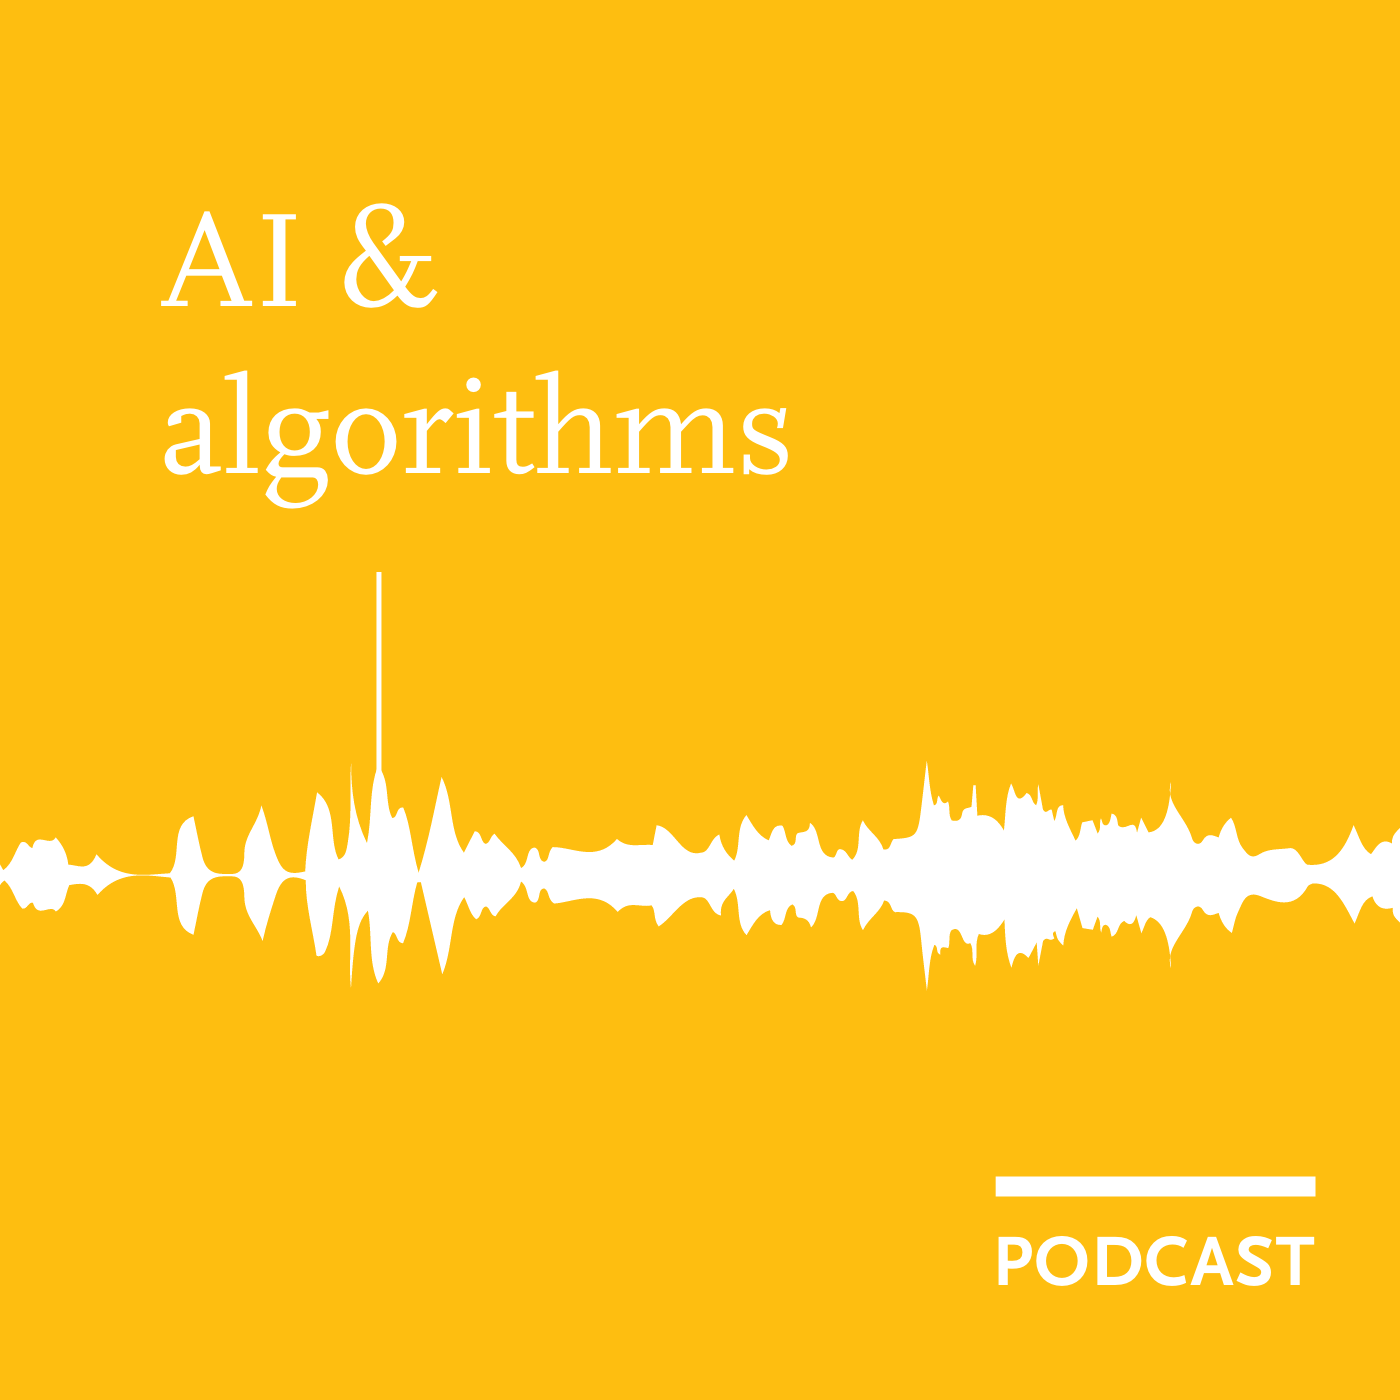 Artificial intelligence and algorithms